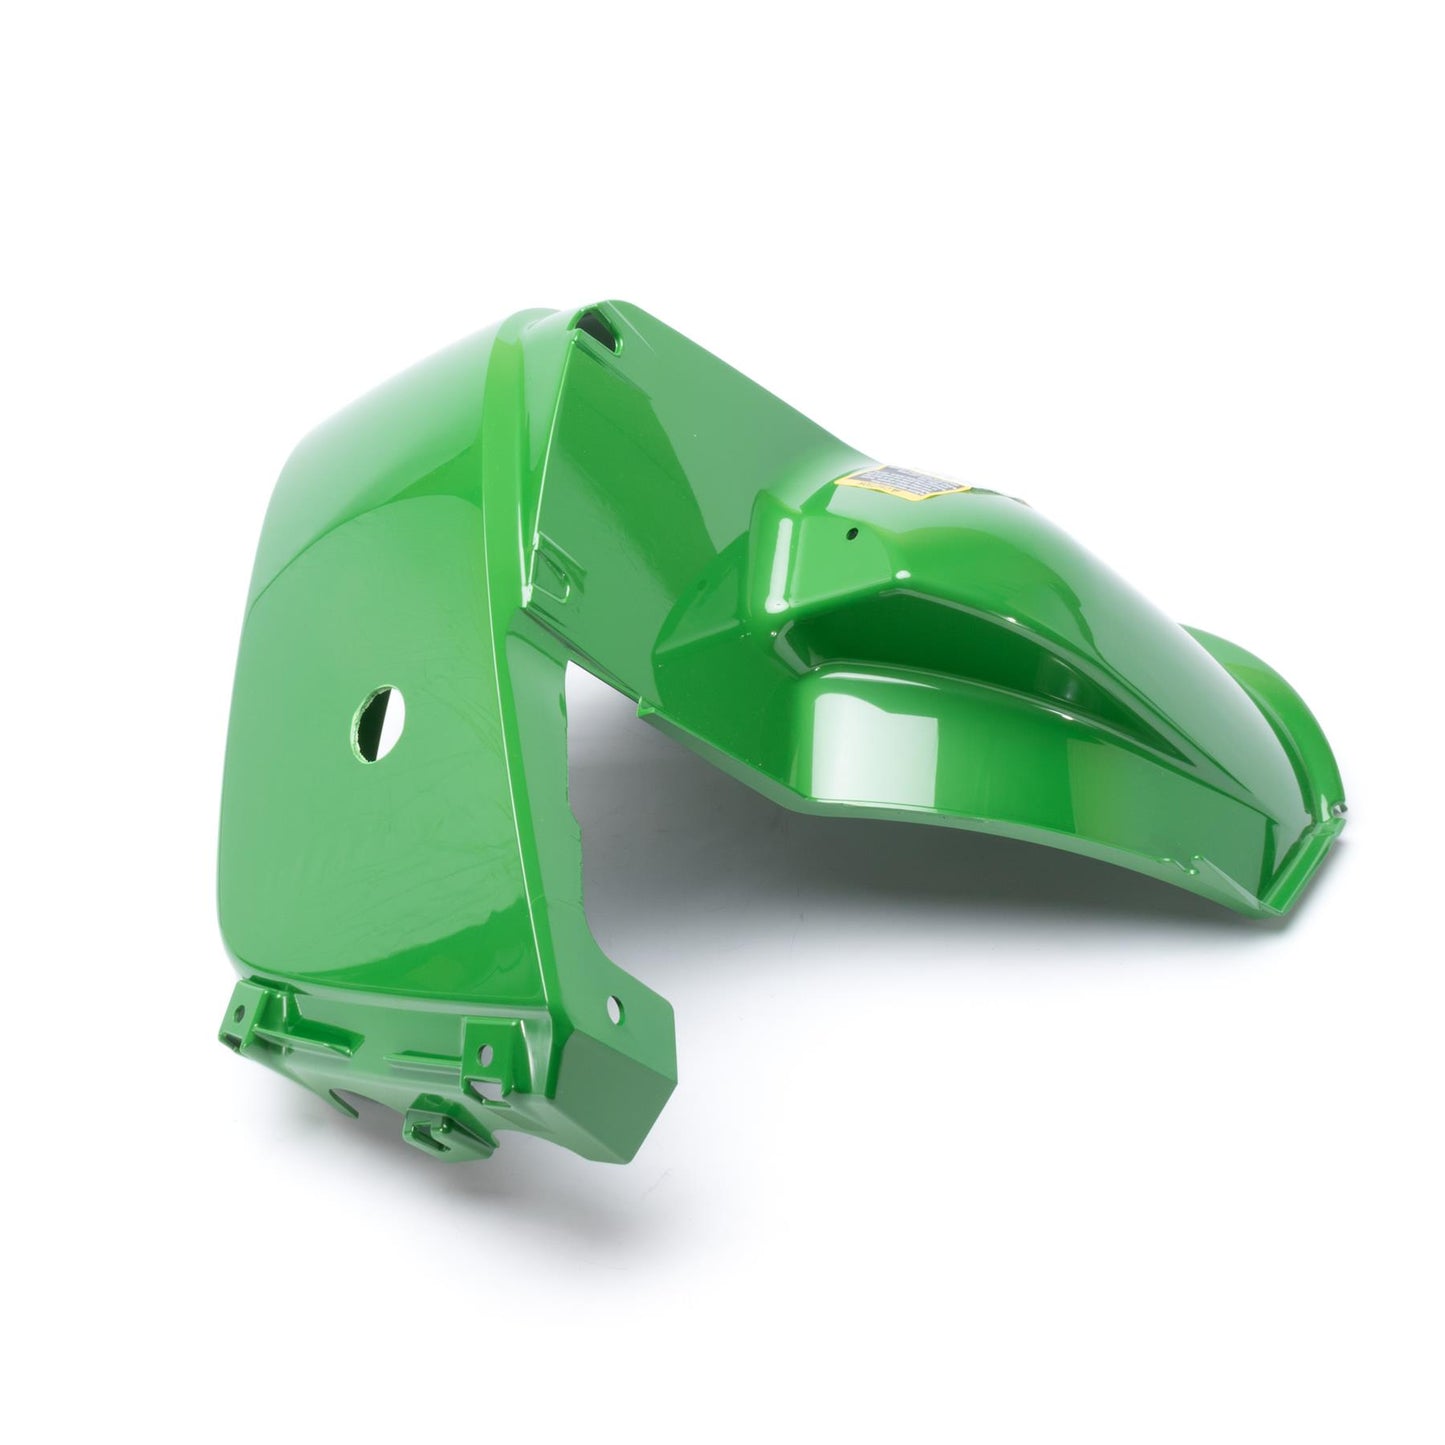 Fender - Front Right - Green